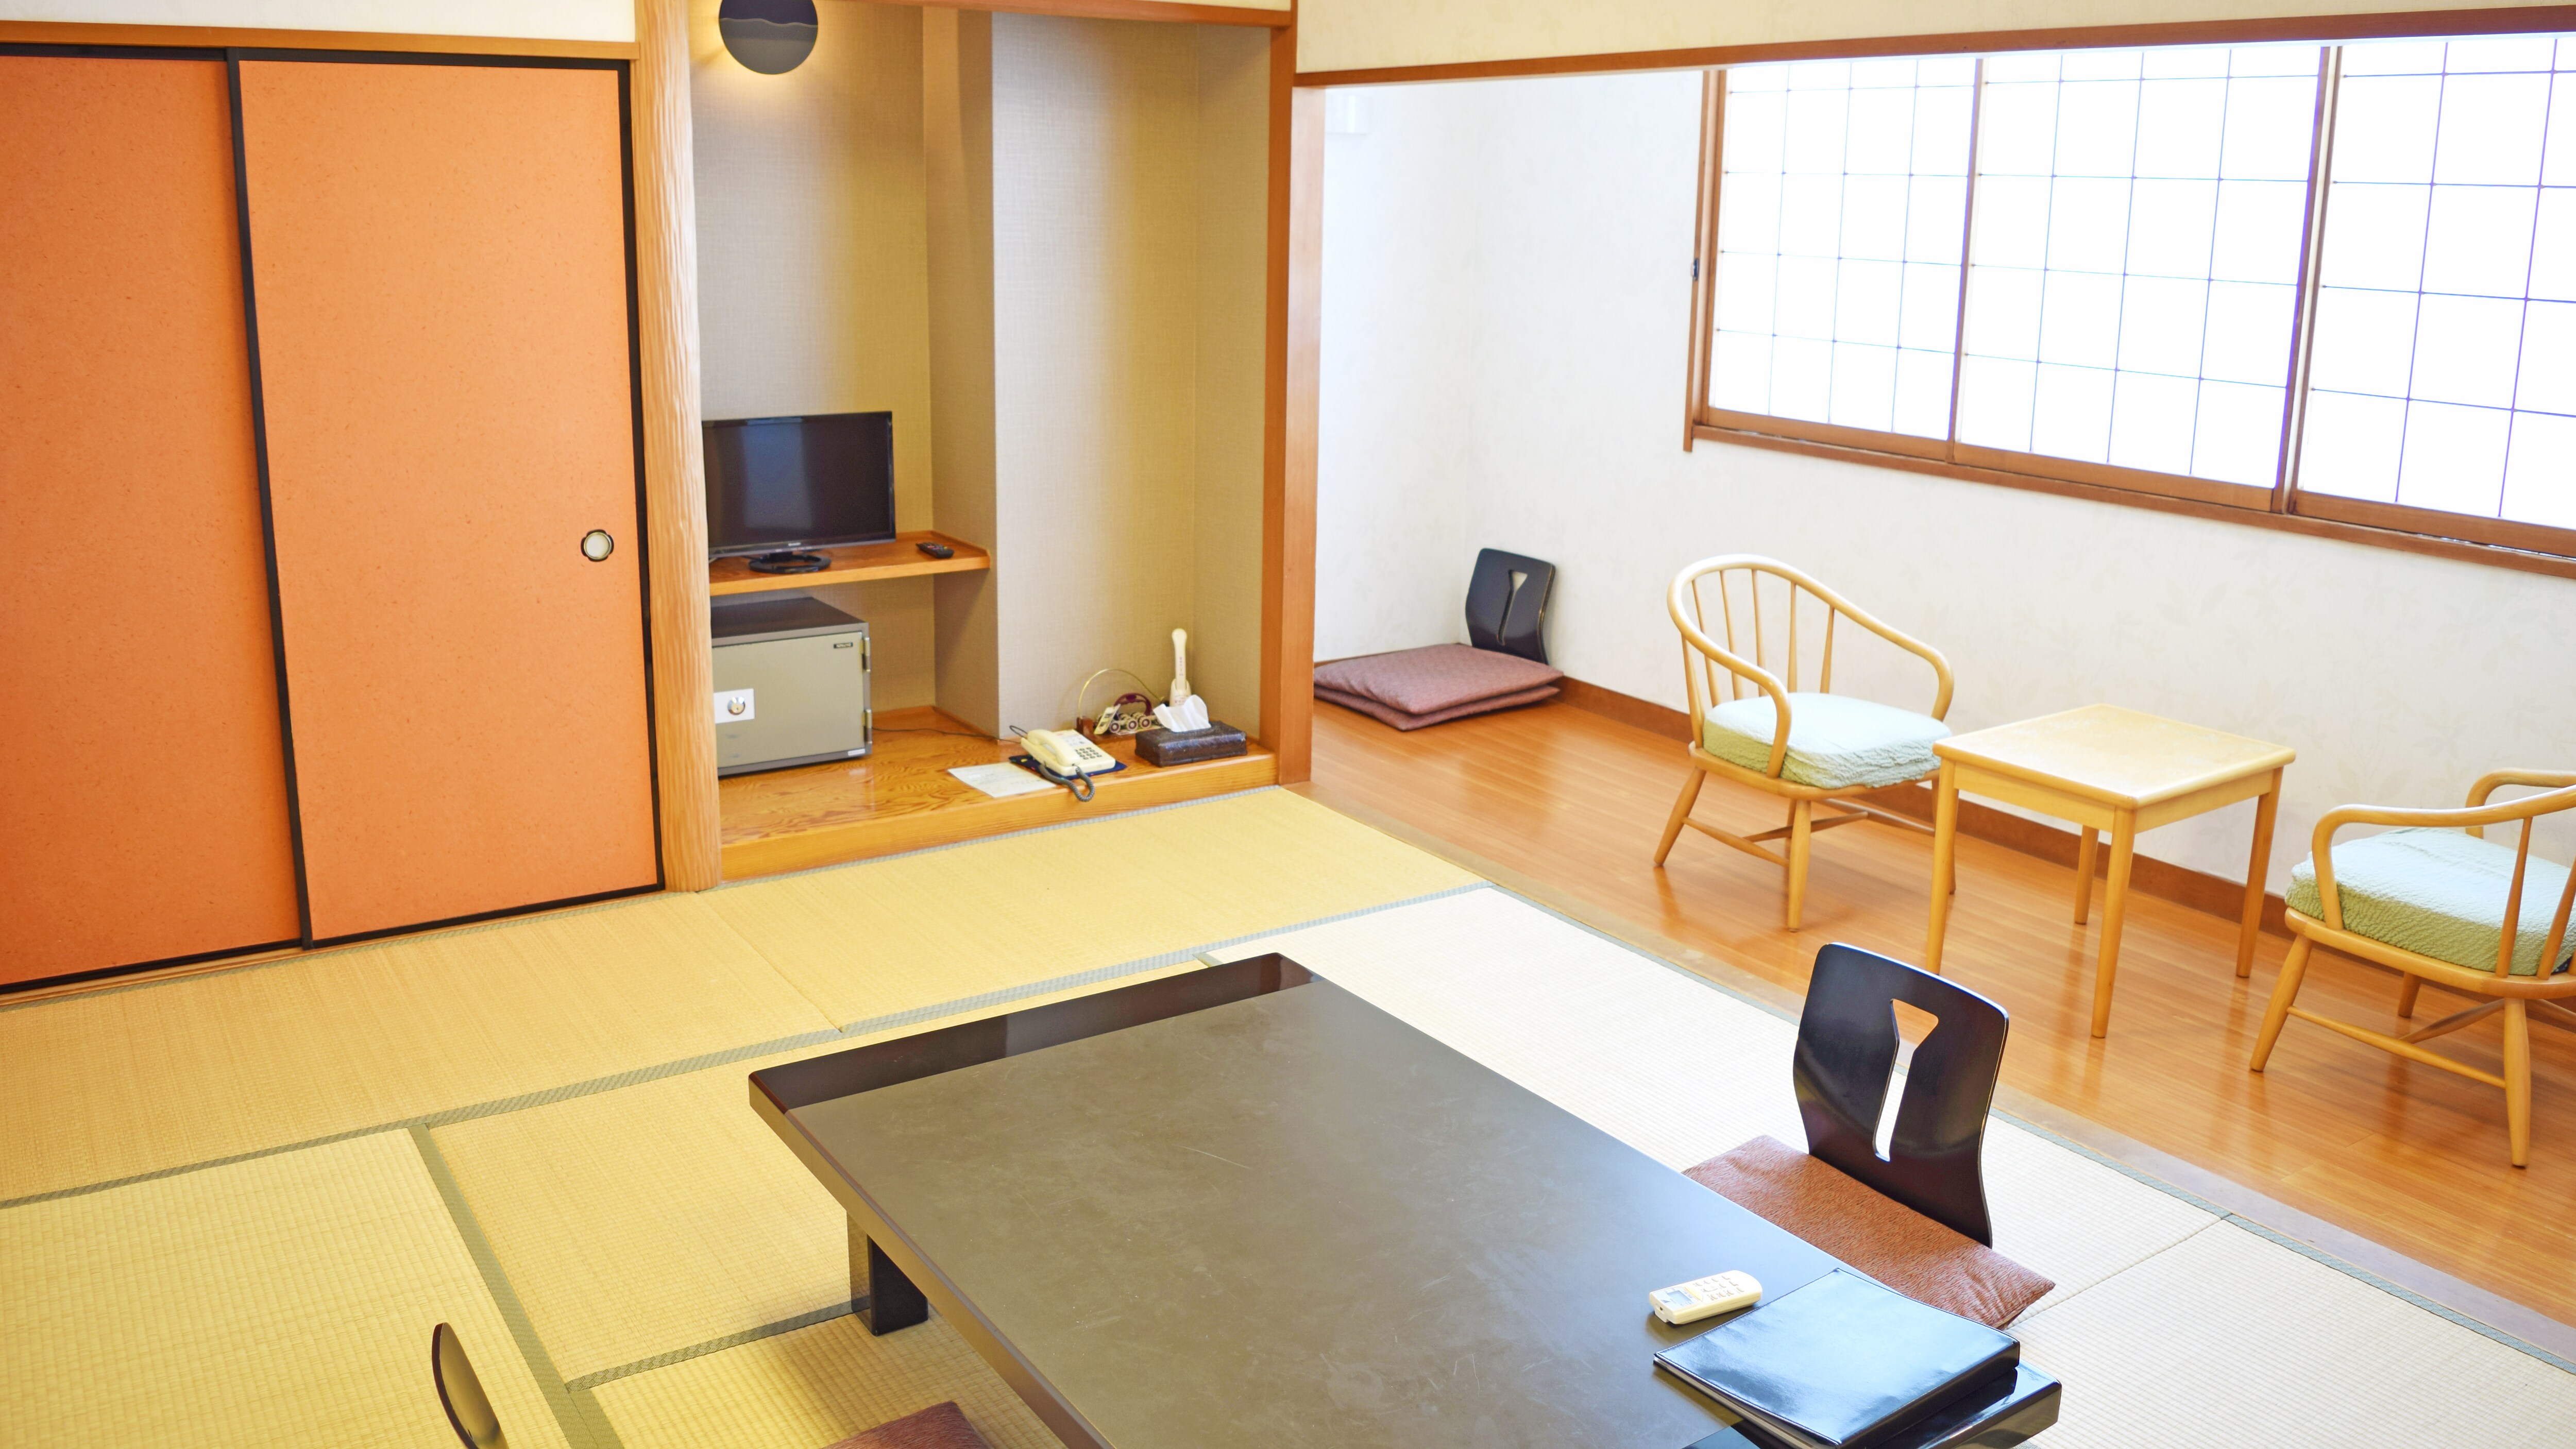 Room type: Non-smoking Japanese-style room